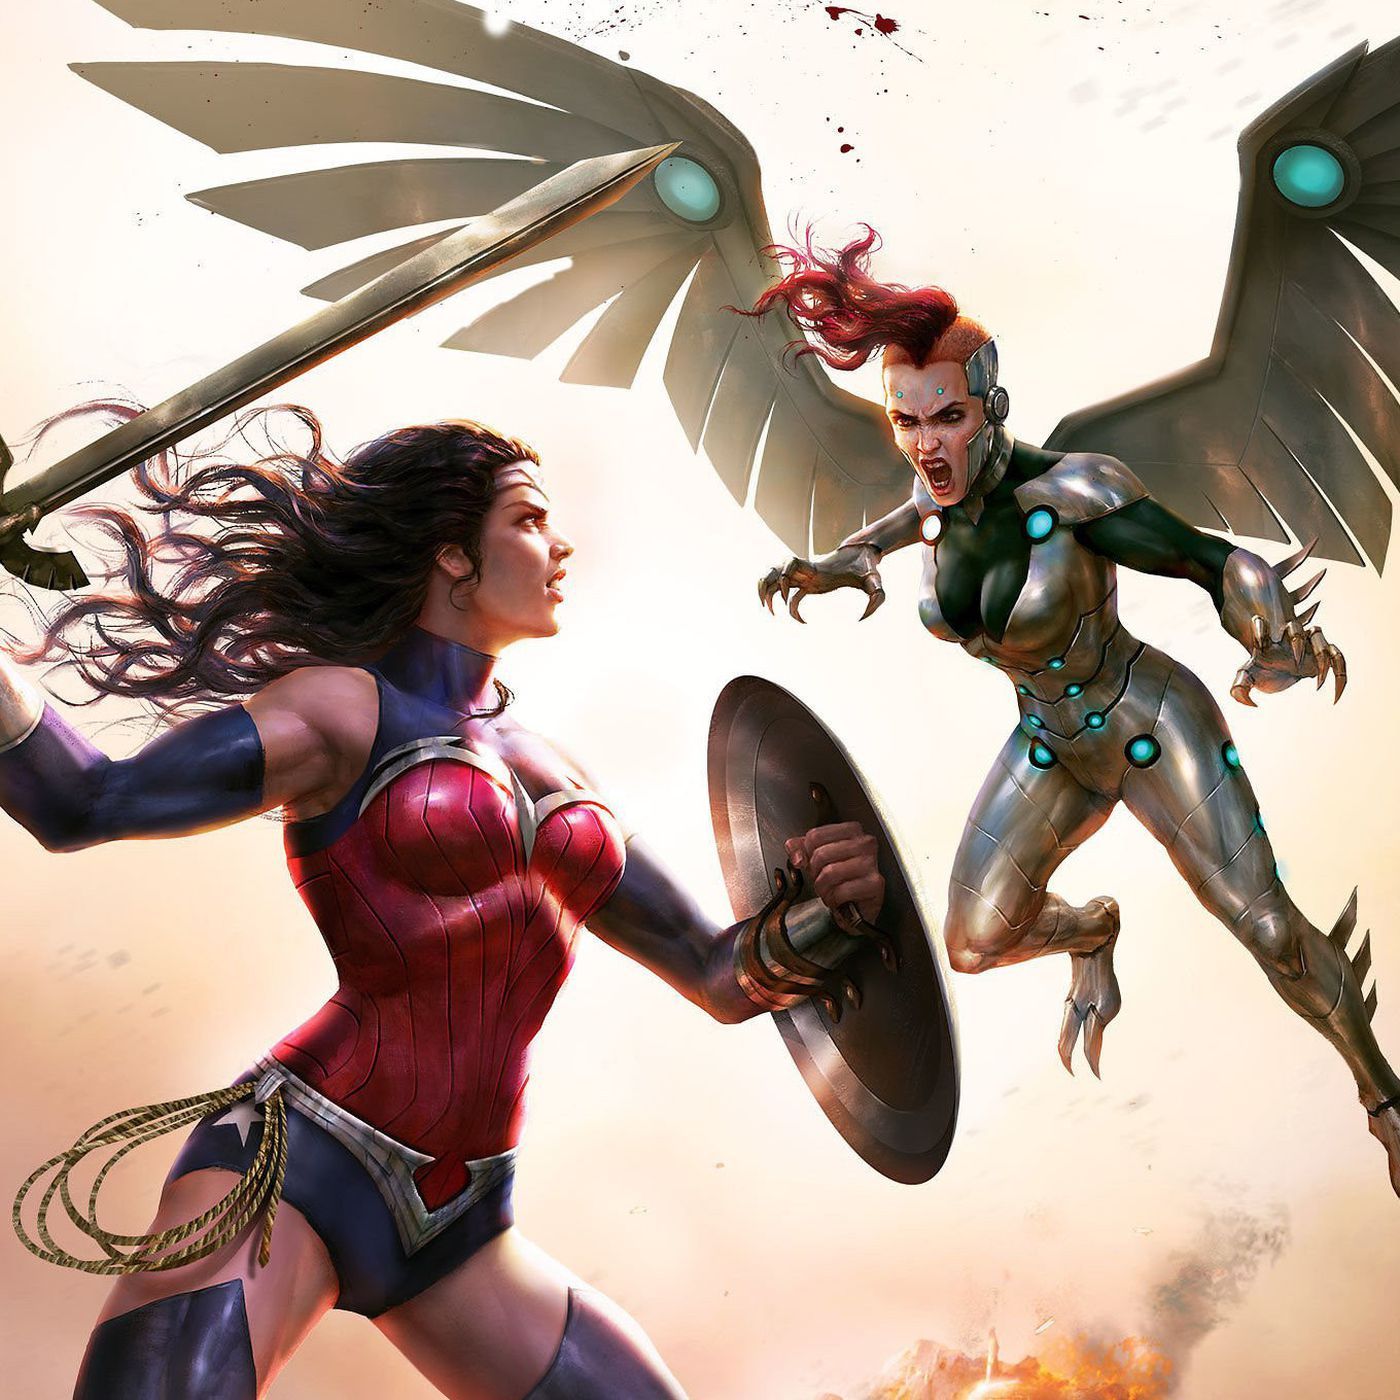 DC's Wonder Woman: Bloodlines is a perfect intro to the hero's